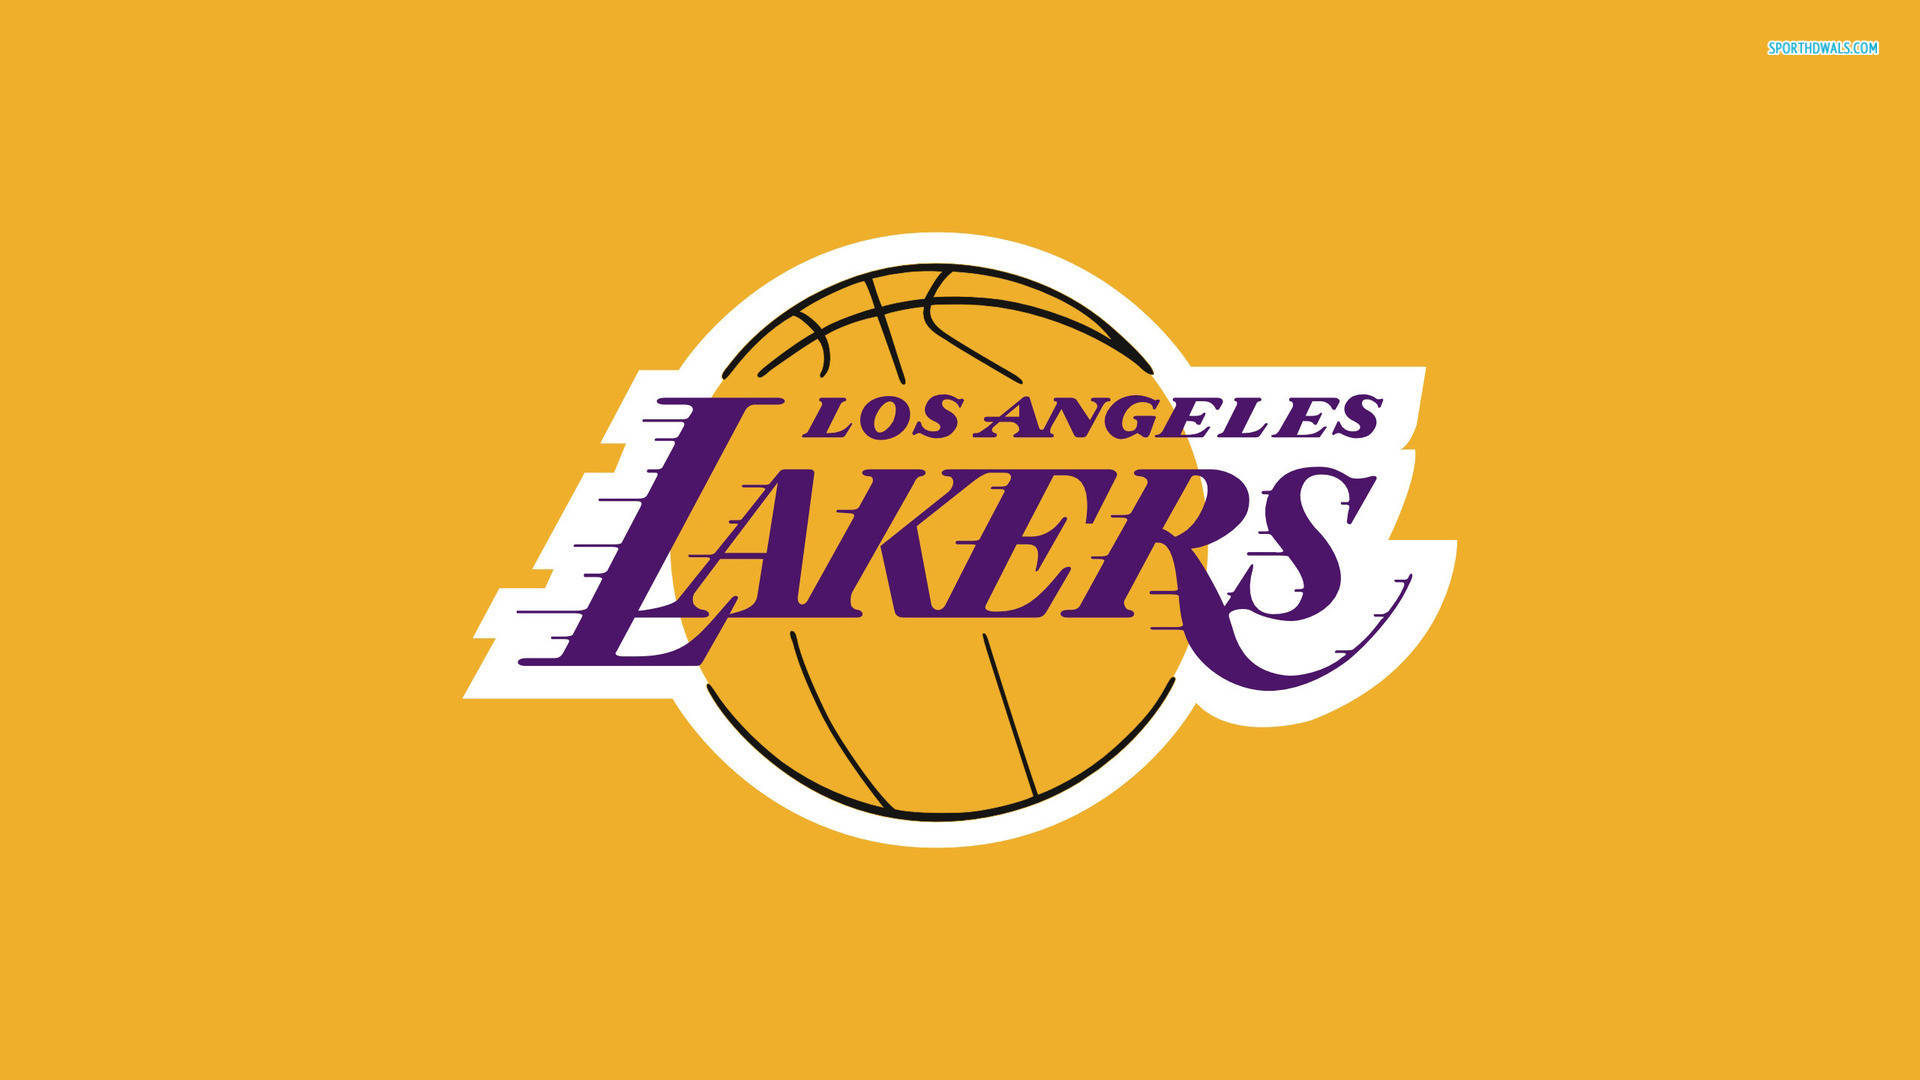 Imágenes Lakers Hd